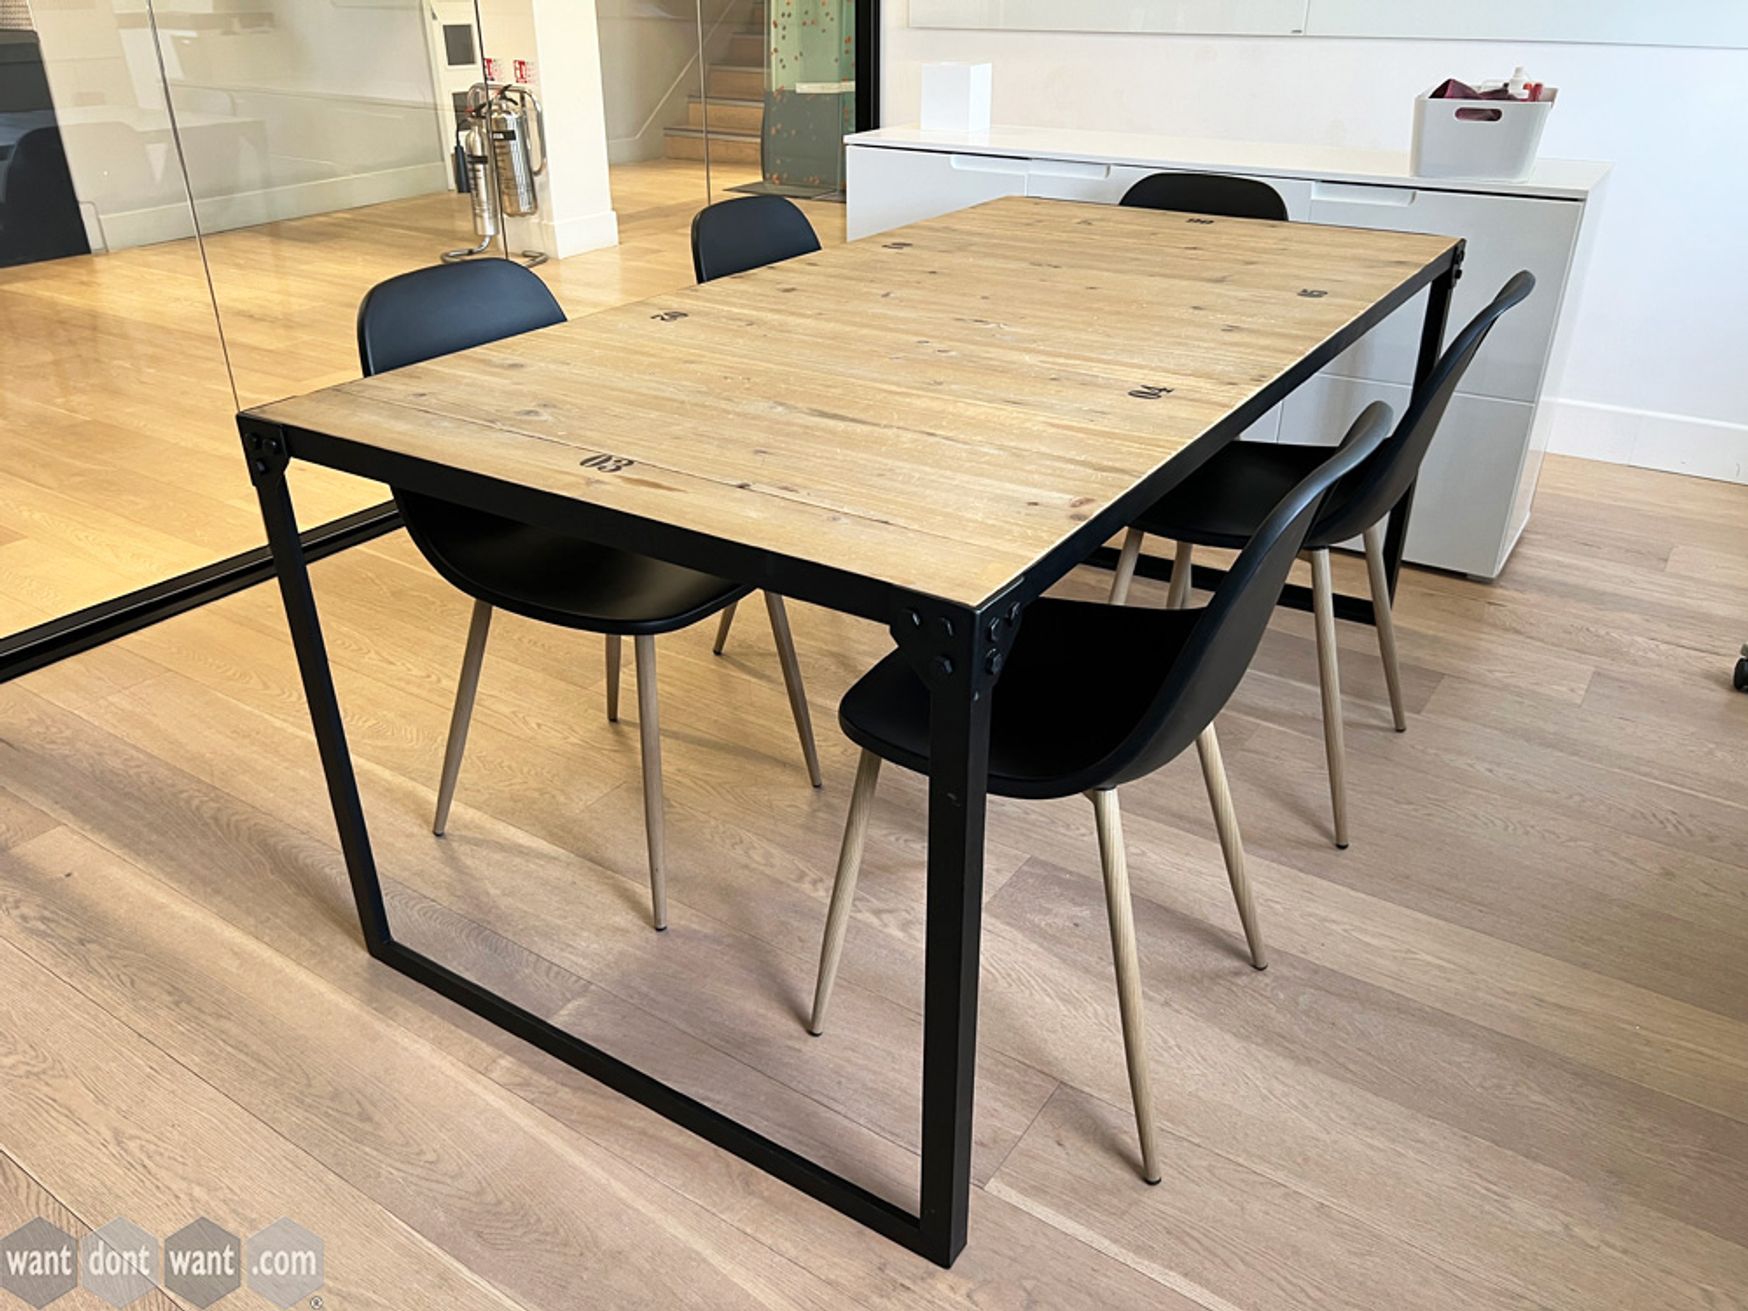 Used meeting table with steel black frame and wood panelled top.